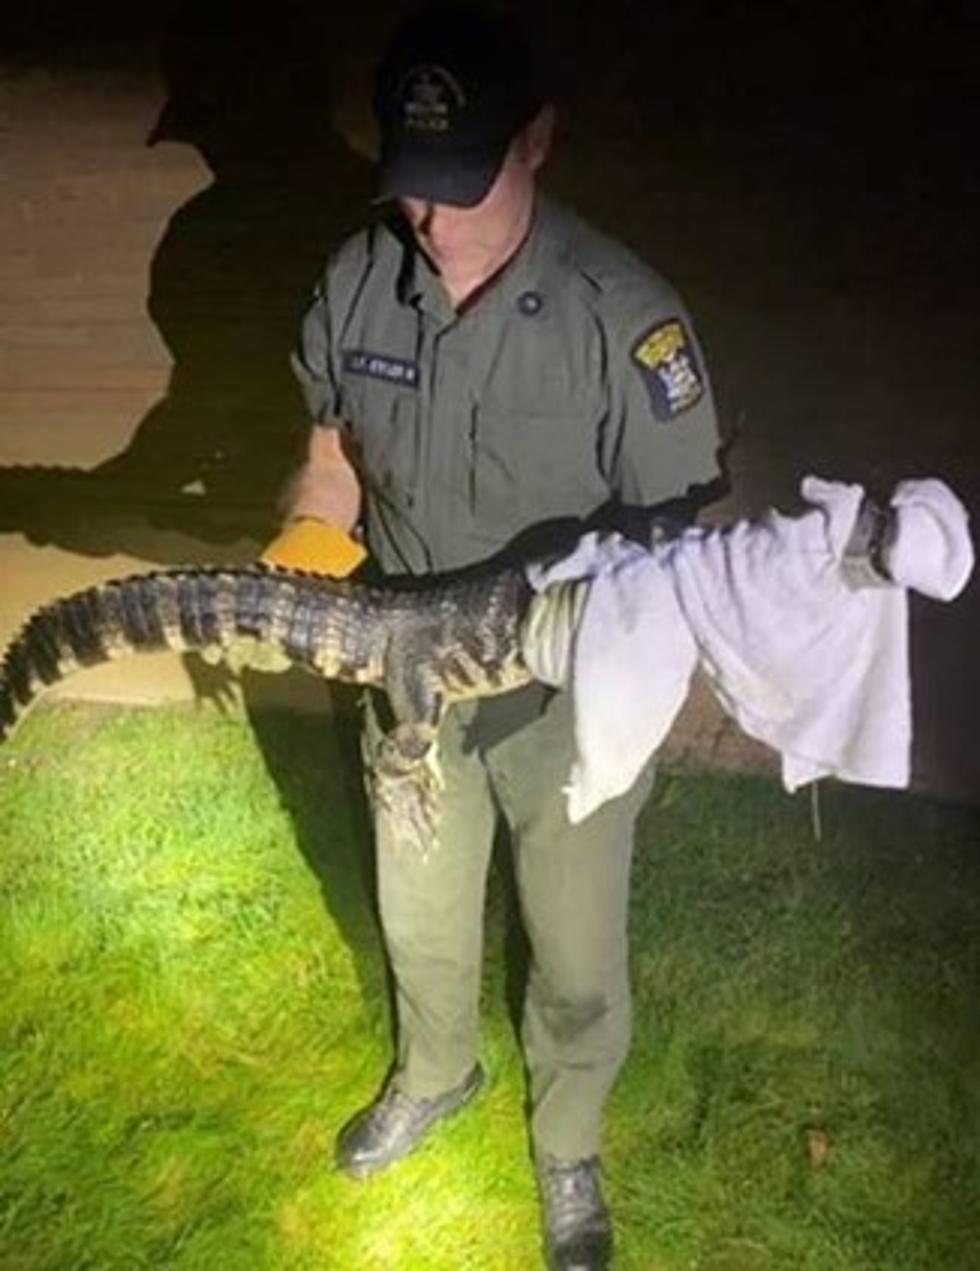 You Won't Believe Where this Alligator Was Found in NY